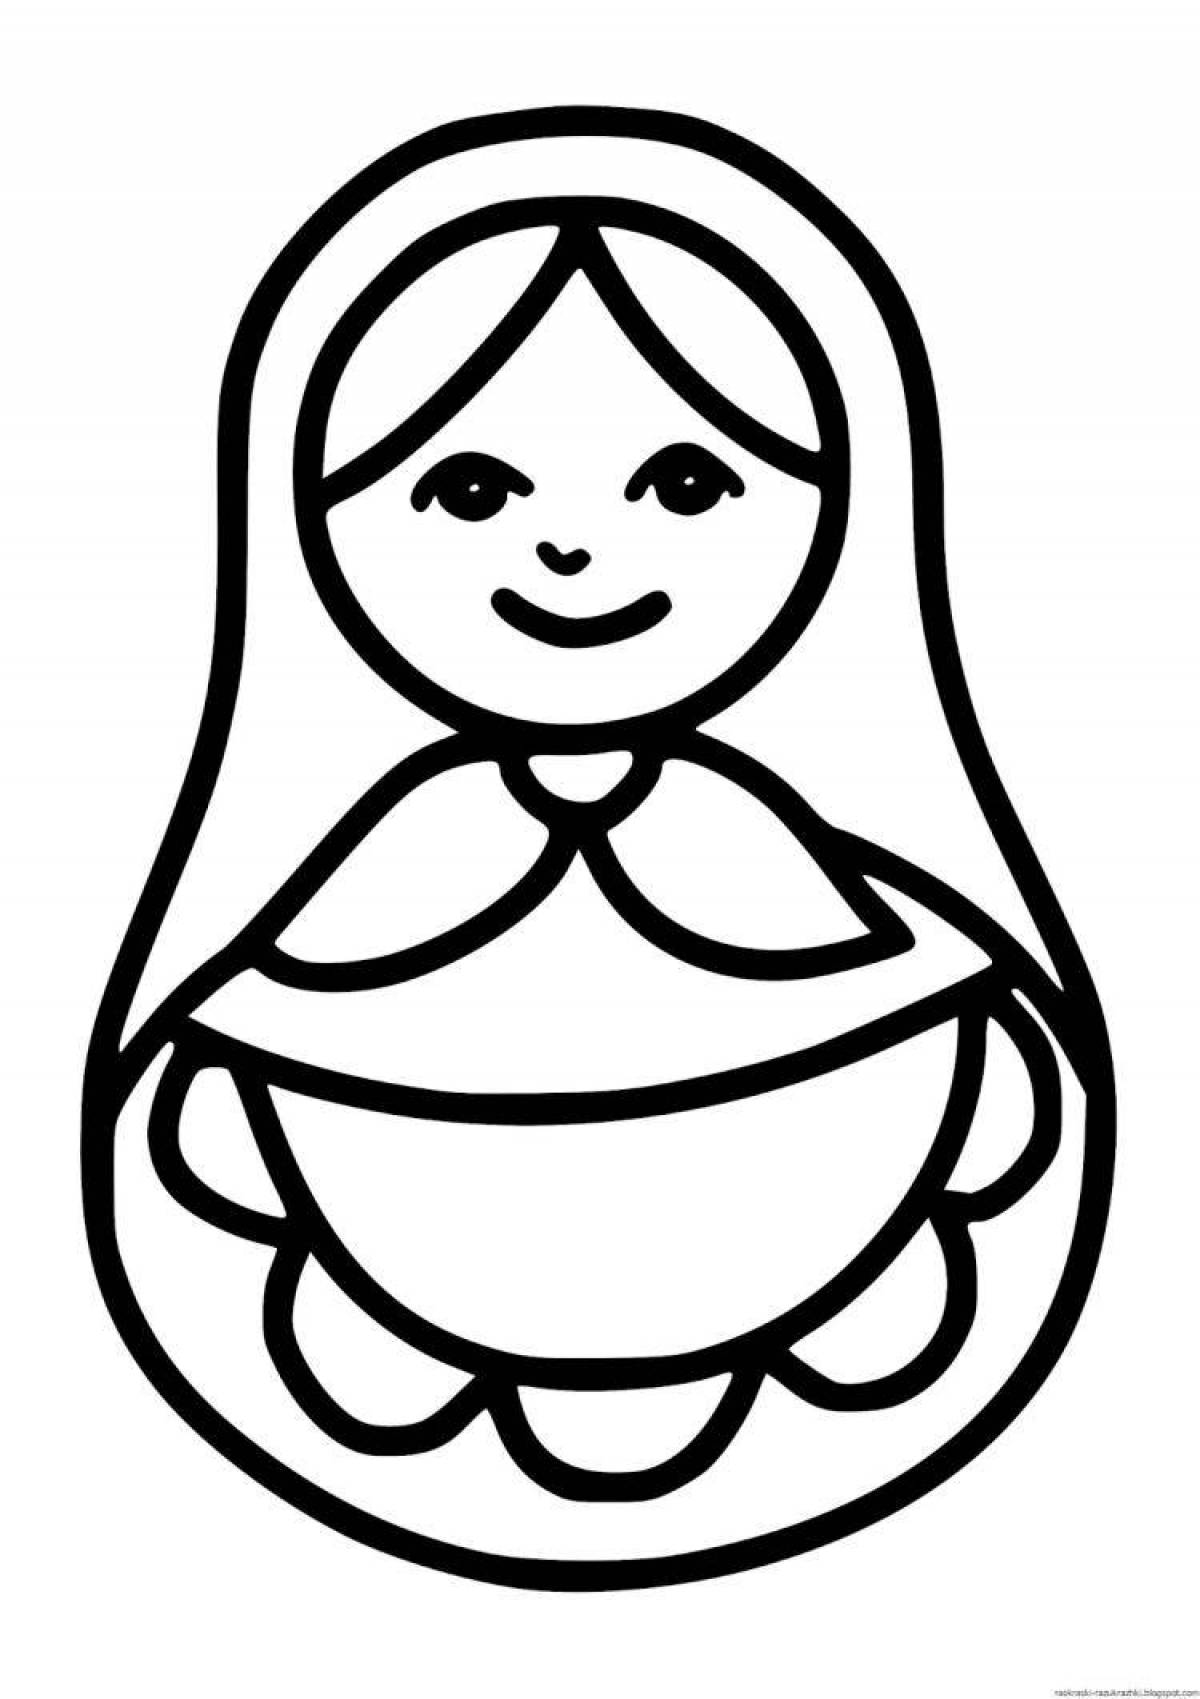 Adorable matryoshka coloring book for 5-6 year olds